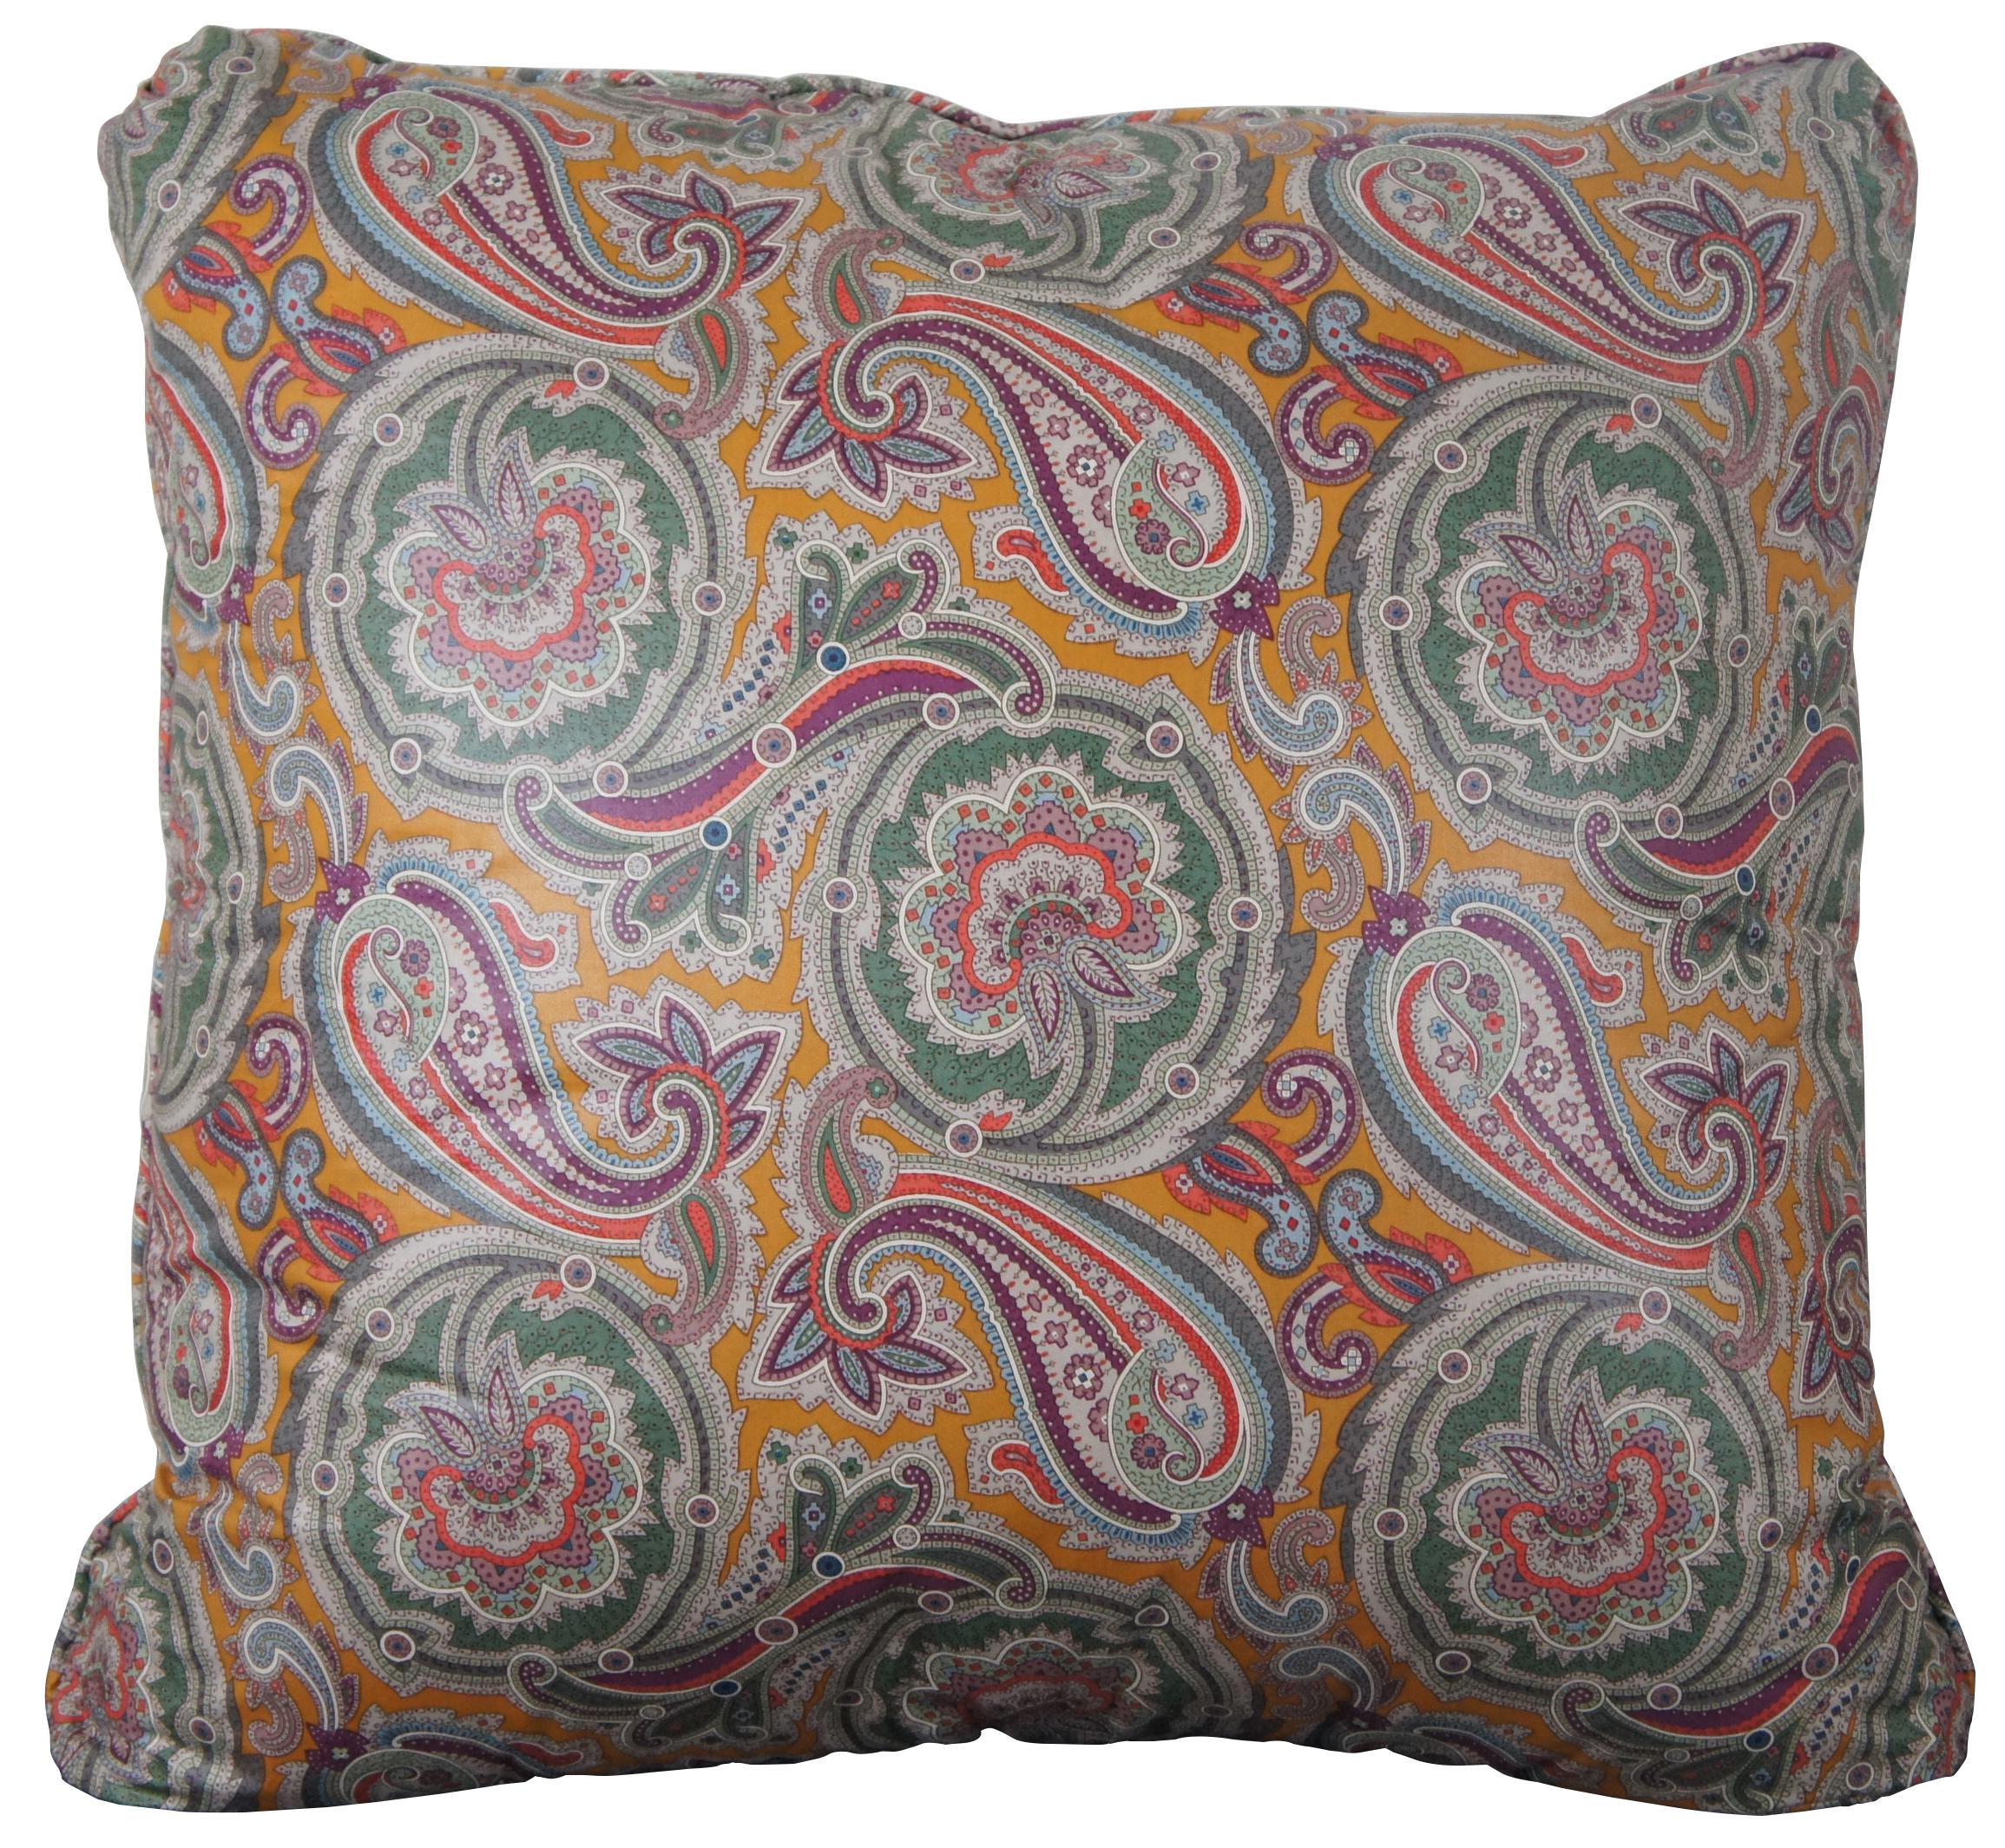 Bohemian 2 Vintage Square Paisley Floral Down Filled Designer Throw Pillows Cushions For Sale